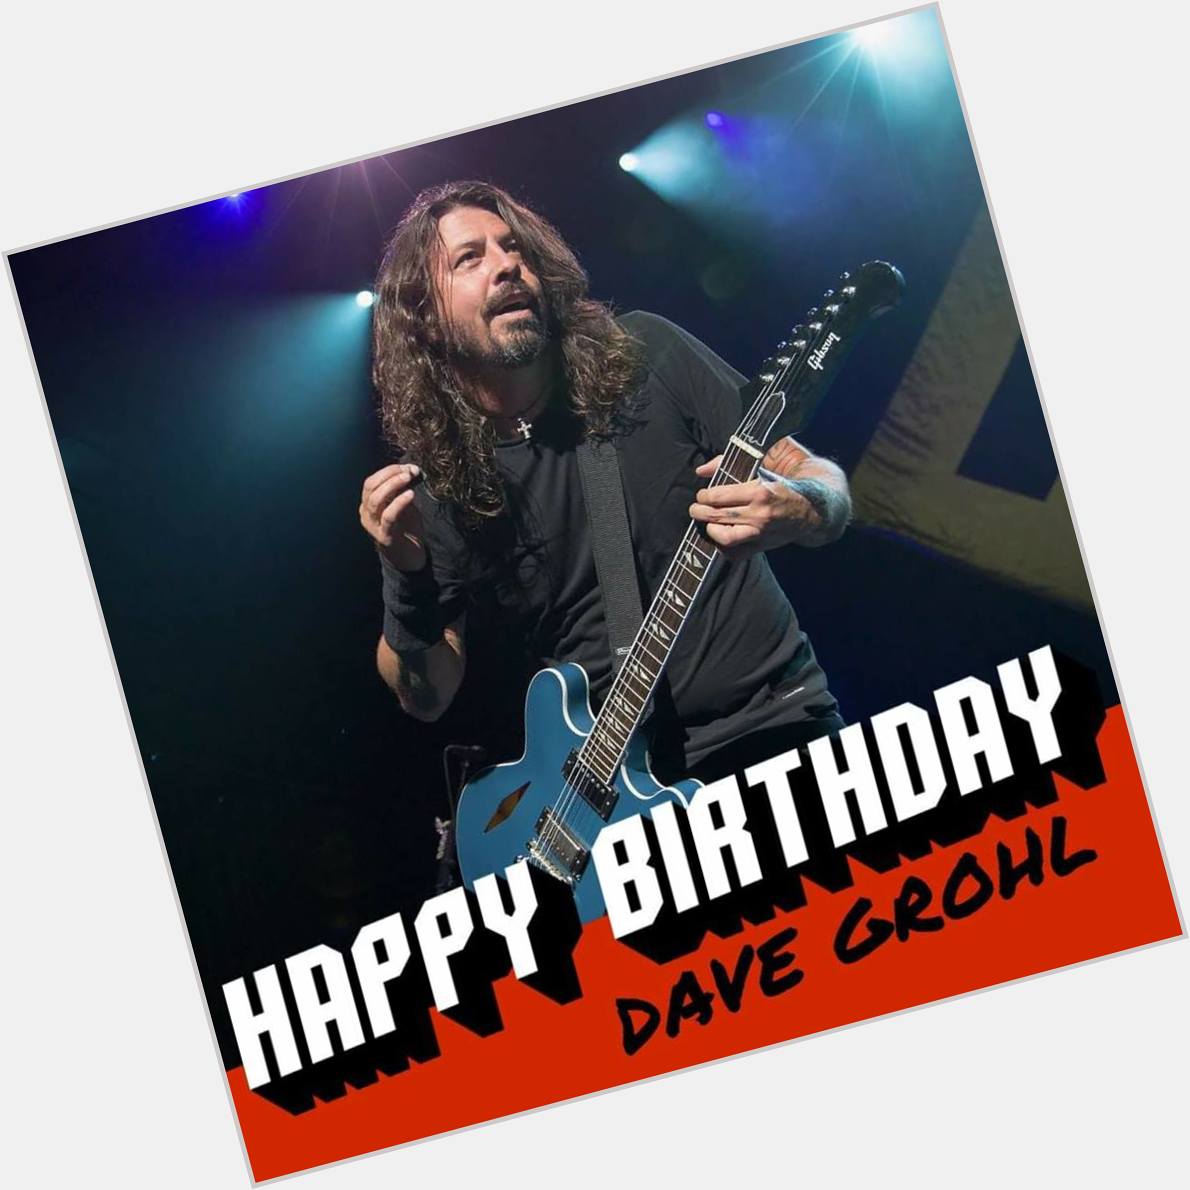 Dave Grohl is turning 49 today! Happy birthday!       